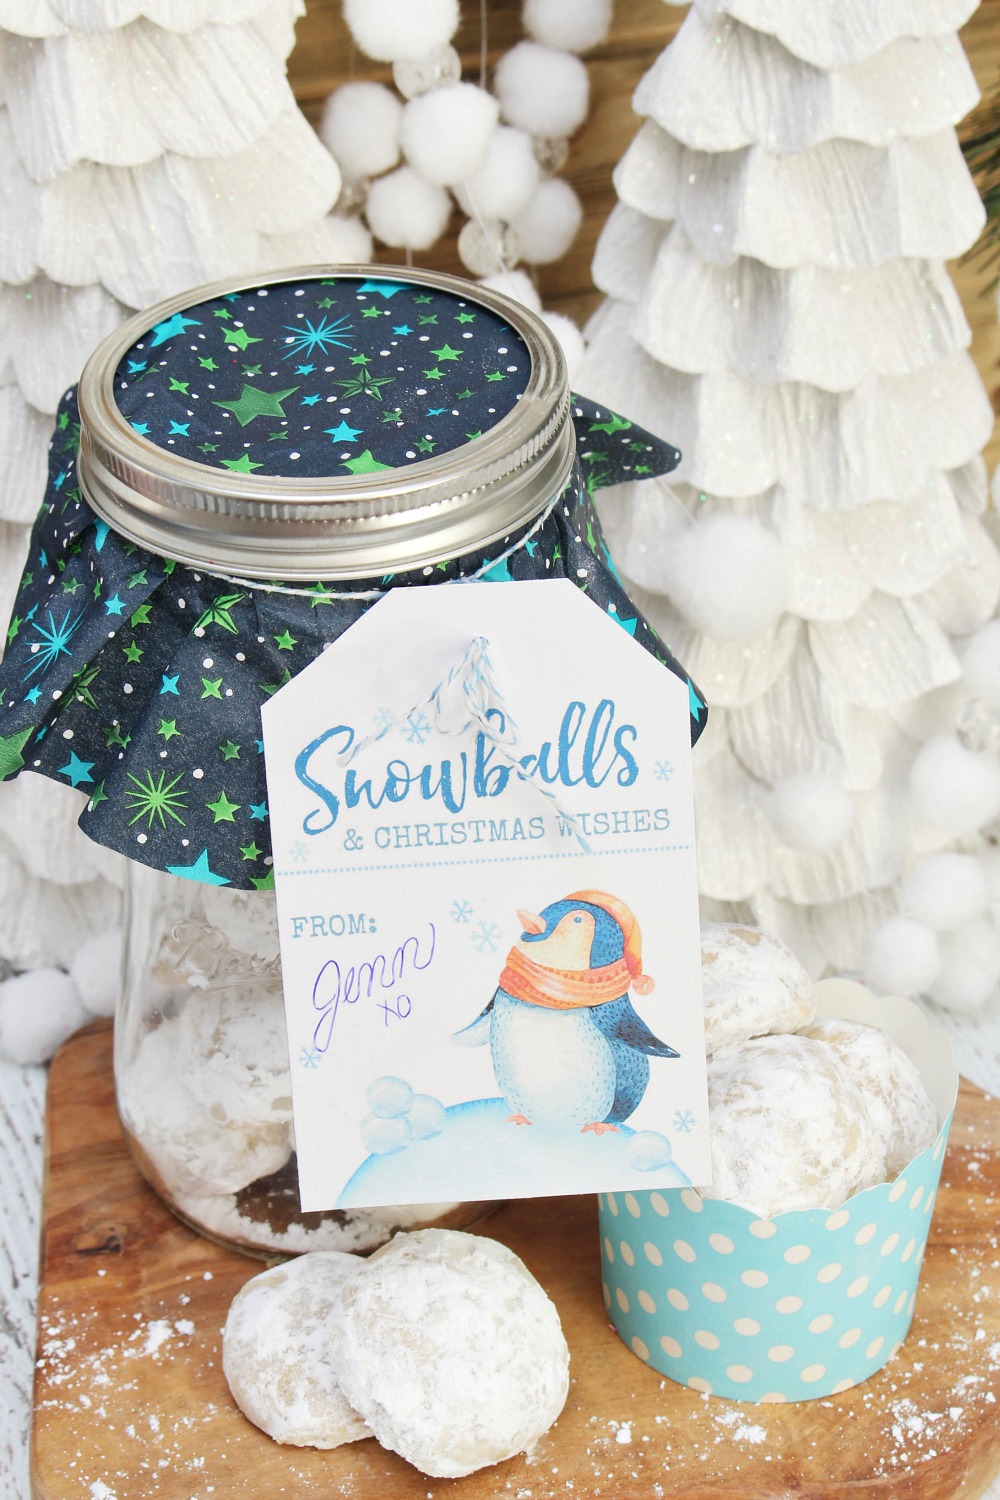 Snowball cookies on a tray and wrapped up in a mason jar gift.